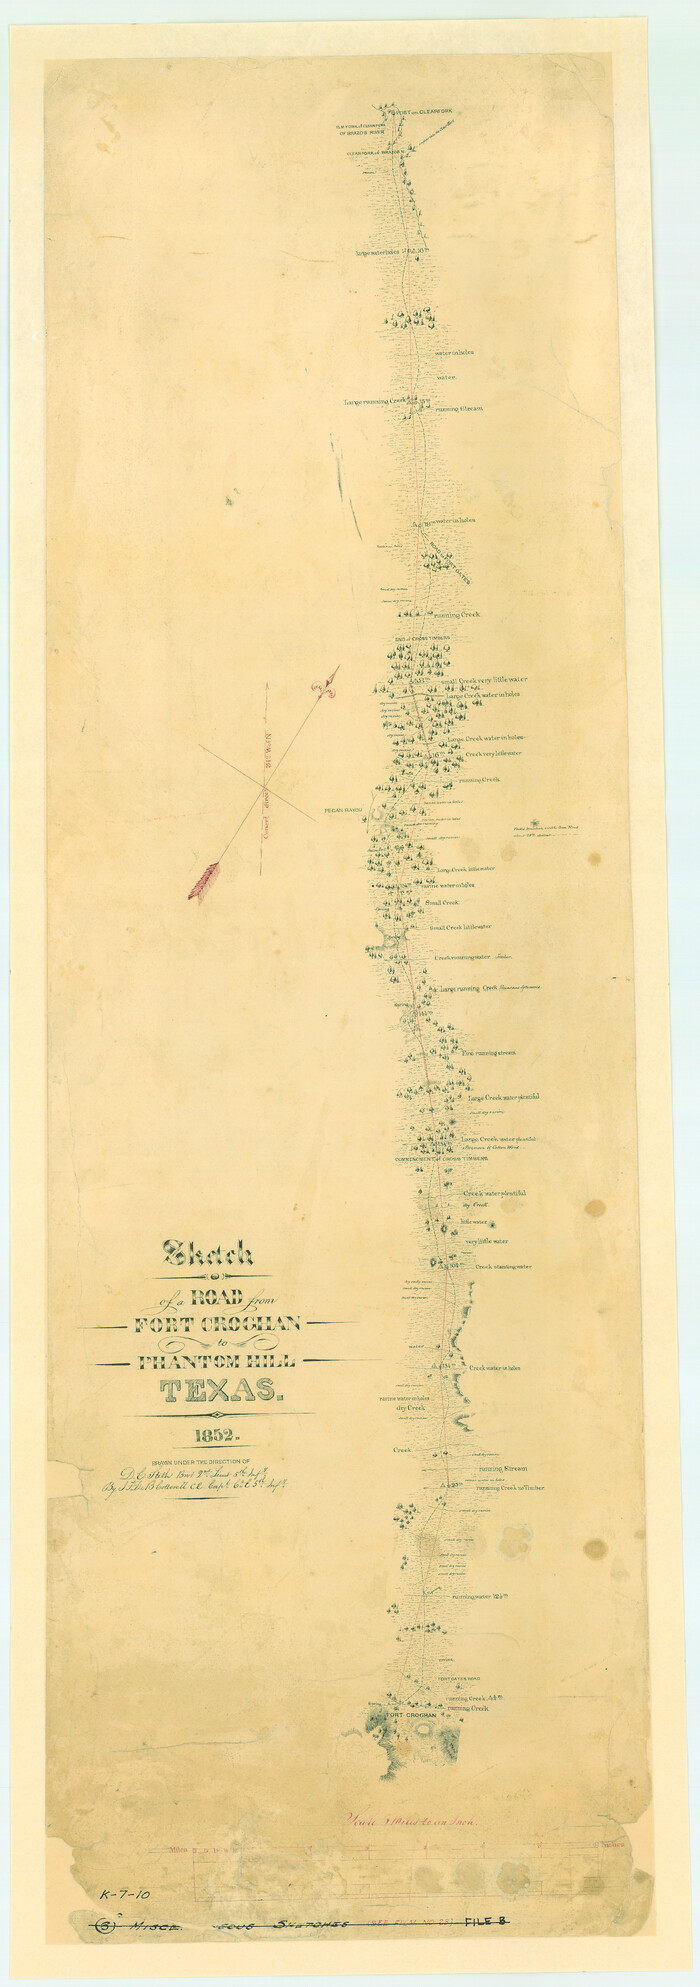 2007, Sketch of a road from Fort Croghan to Phantom Hill, Texas, General Map Collection